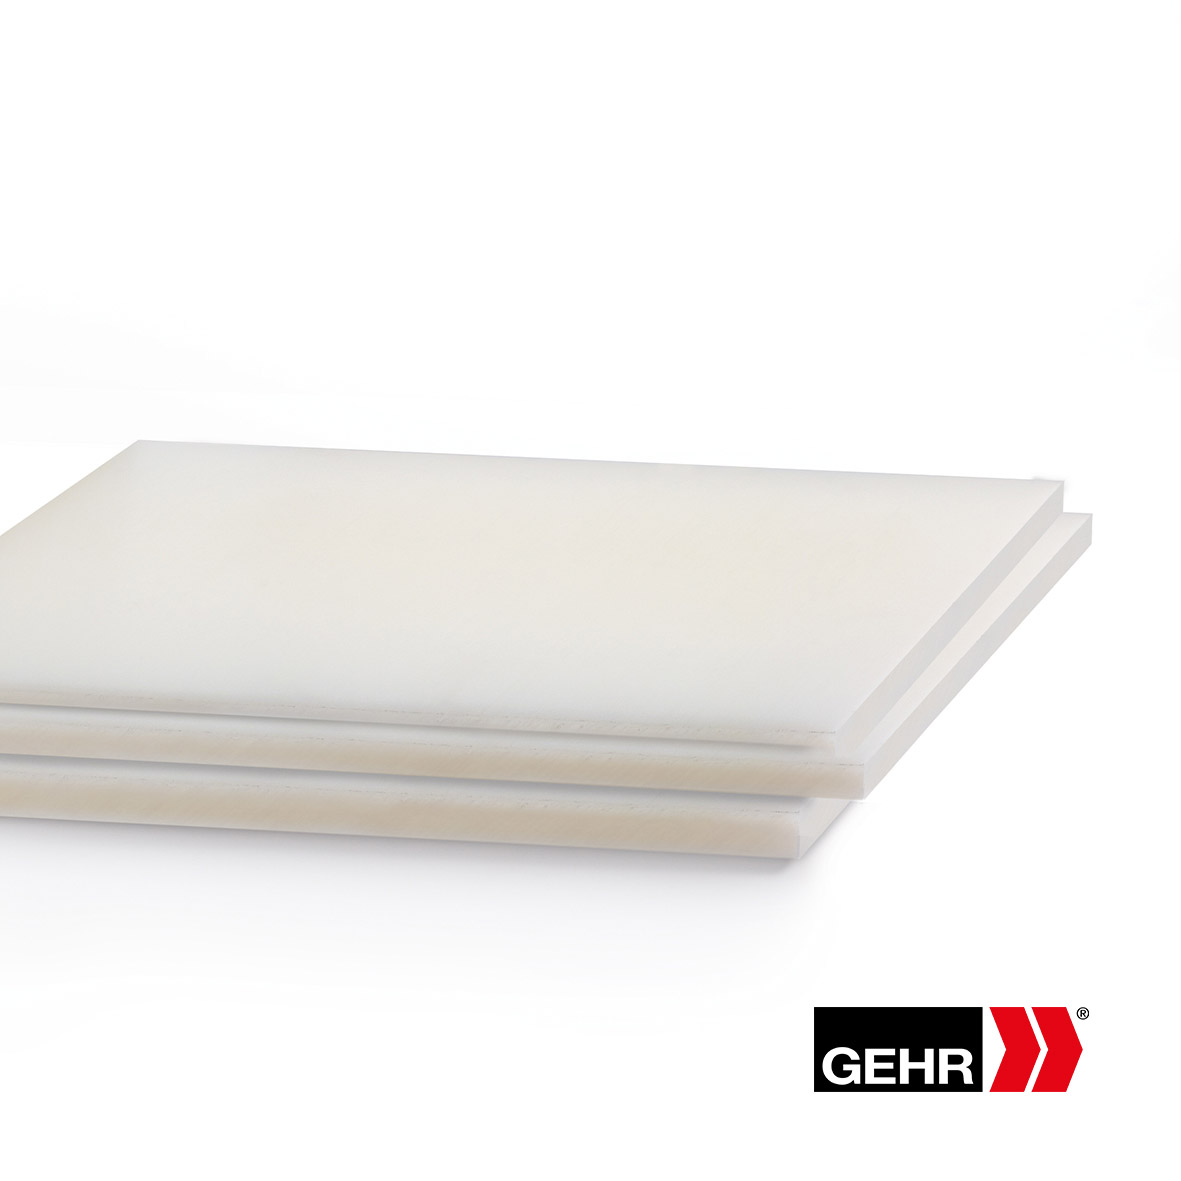 GEHR POM-ESD 9 Sheets 610 x 15 mm ivory